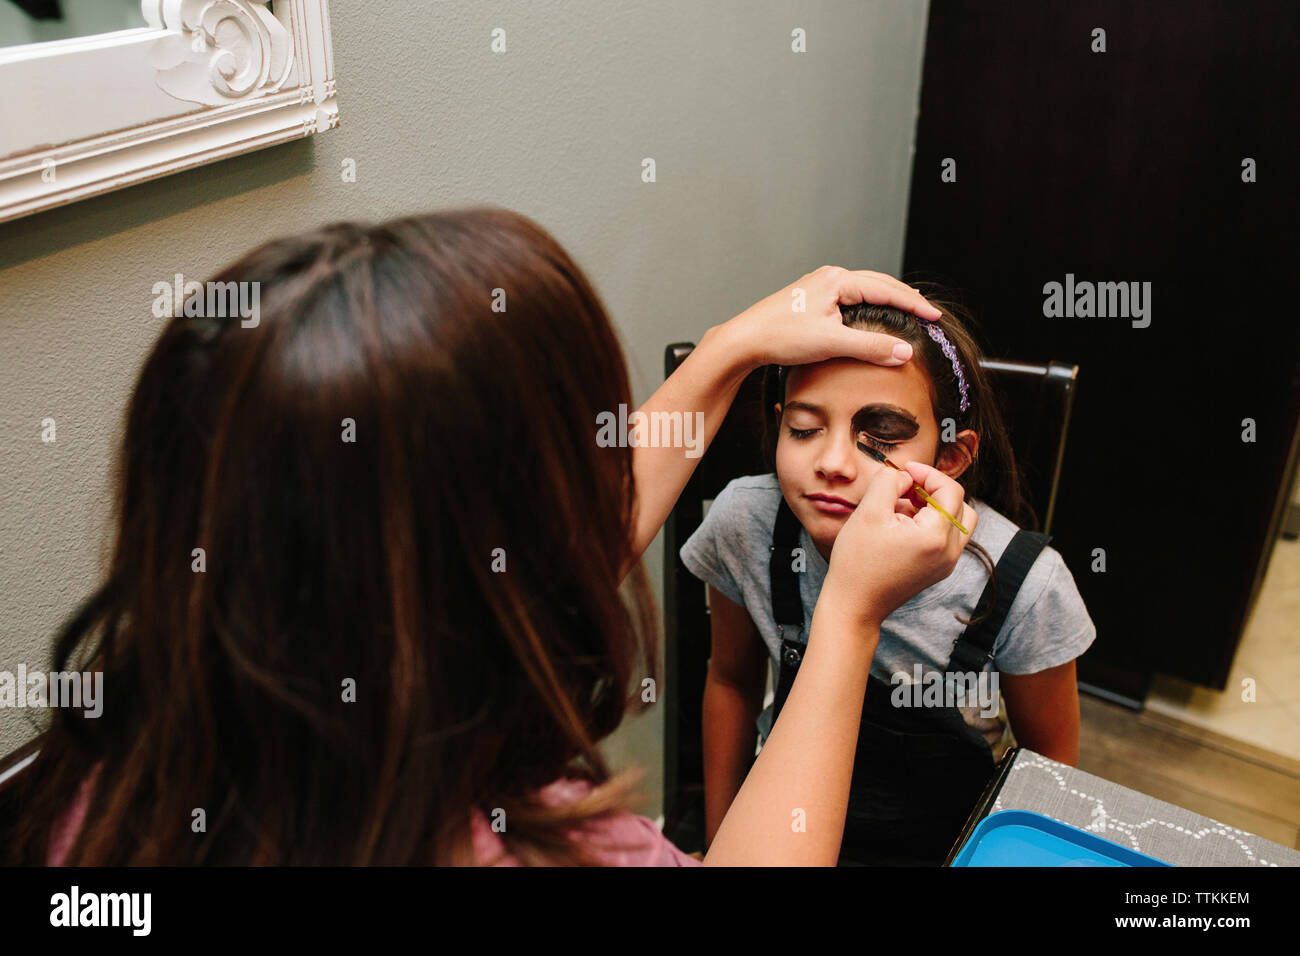 Woman applying make-up on daughter's face at home Stock Photo